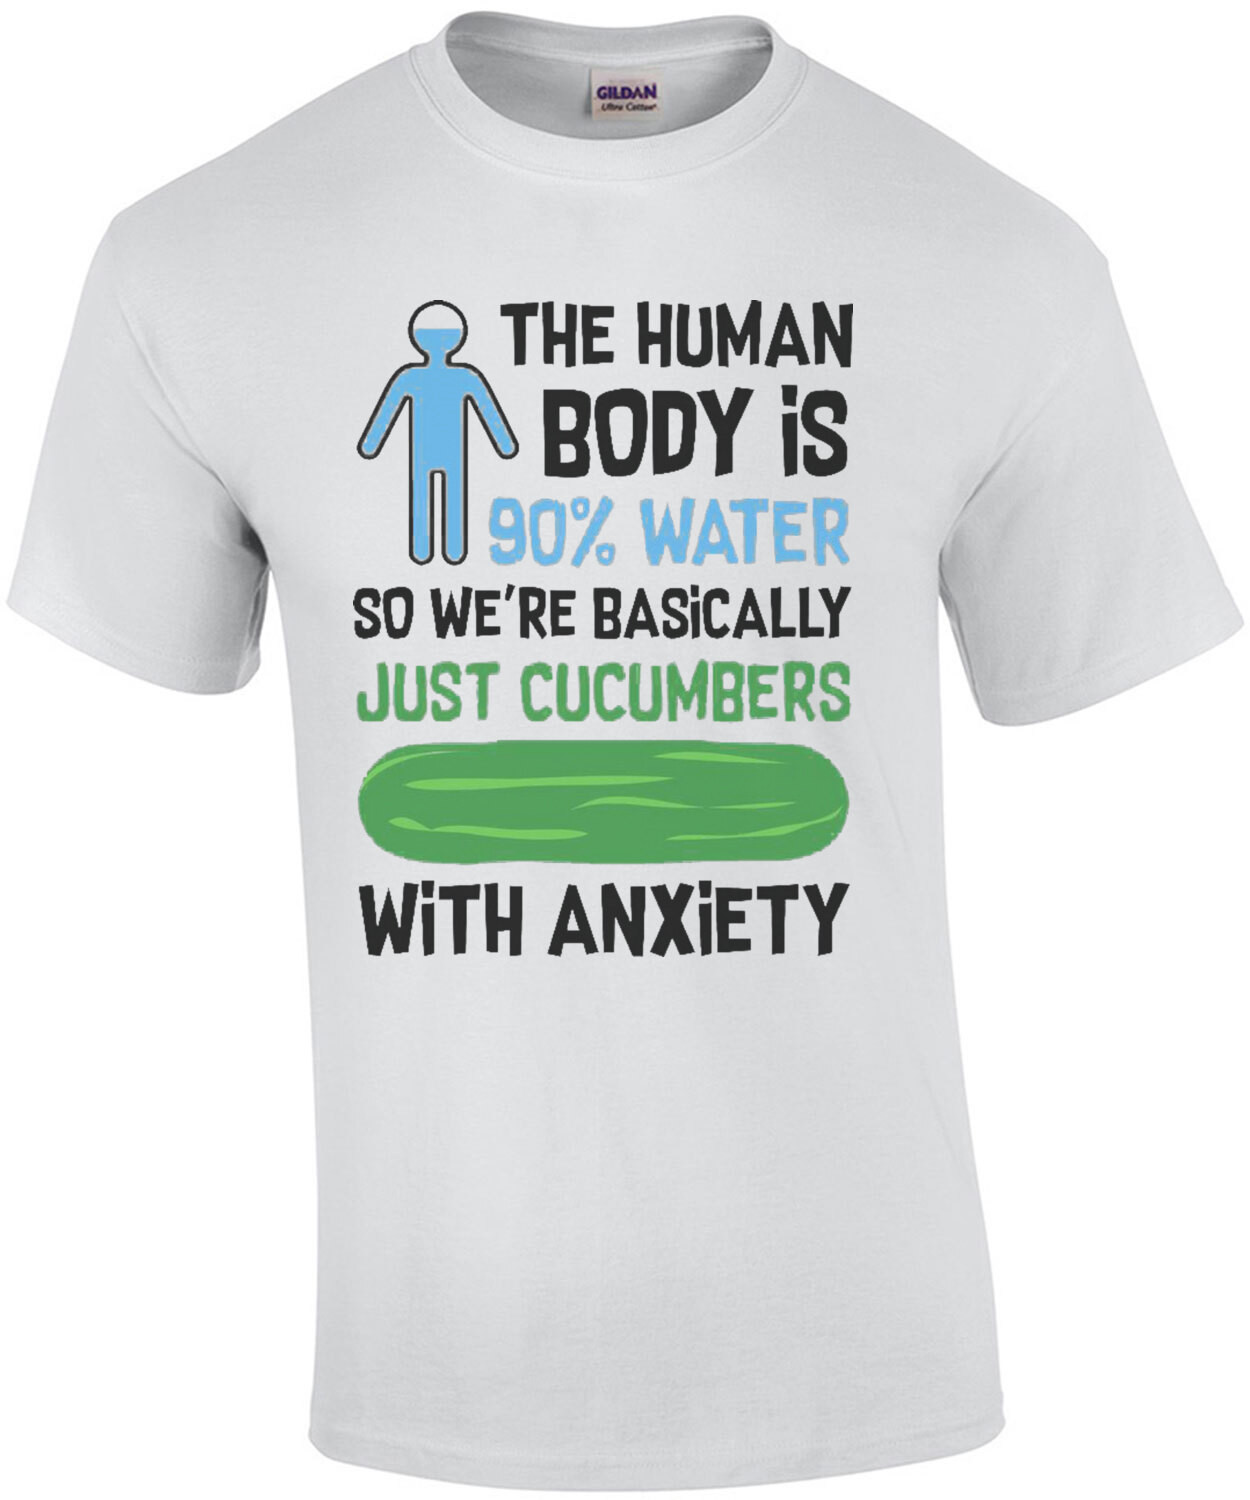 The Human Body 90% Water Basically Cucumbers With Anxiety Shirt